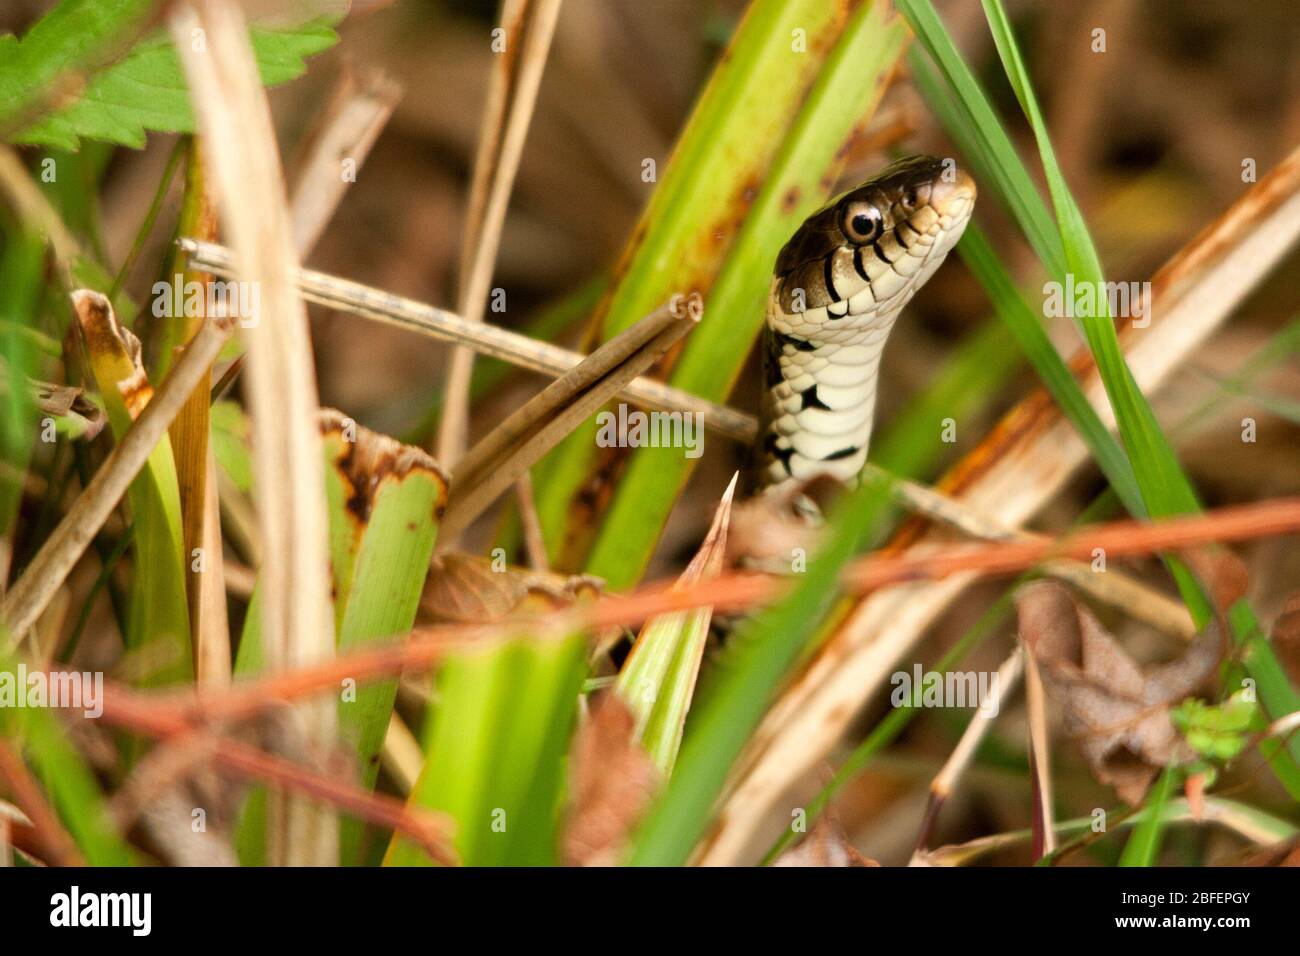 Grass snake Natrix natrix greenish body with dark blotches along flanks white underside with dark markings. Has round pupils and a yellow neck collar Stock Photo